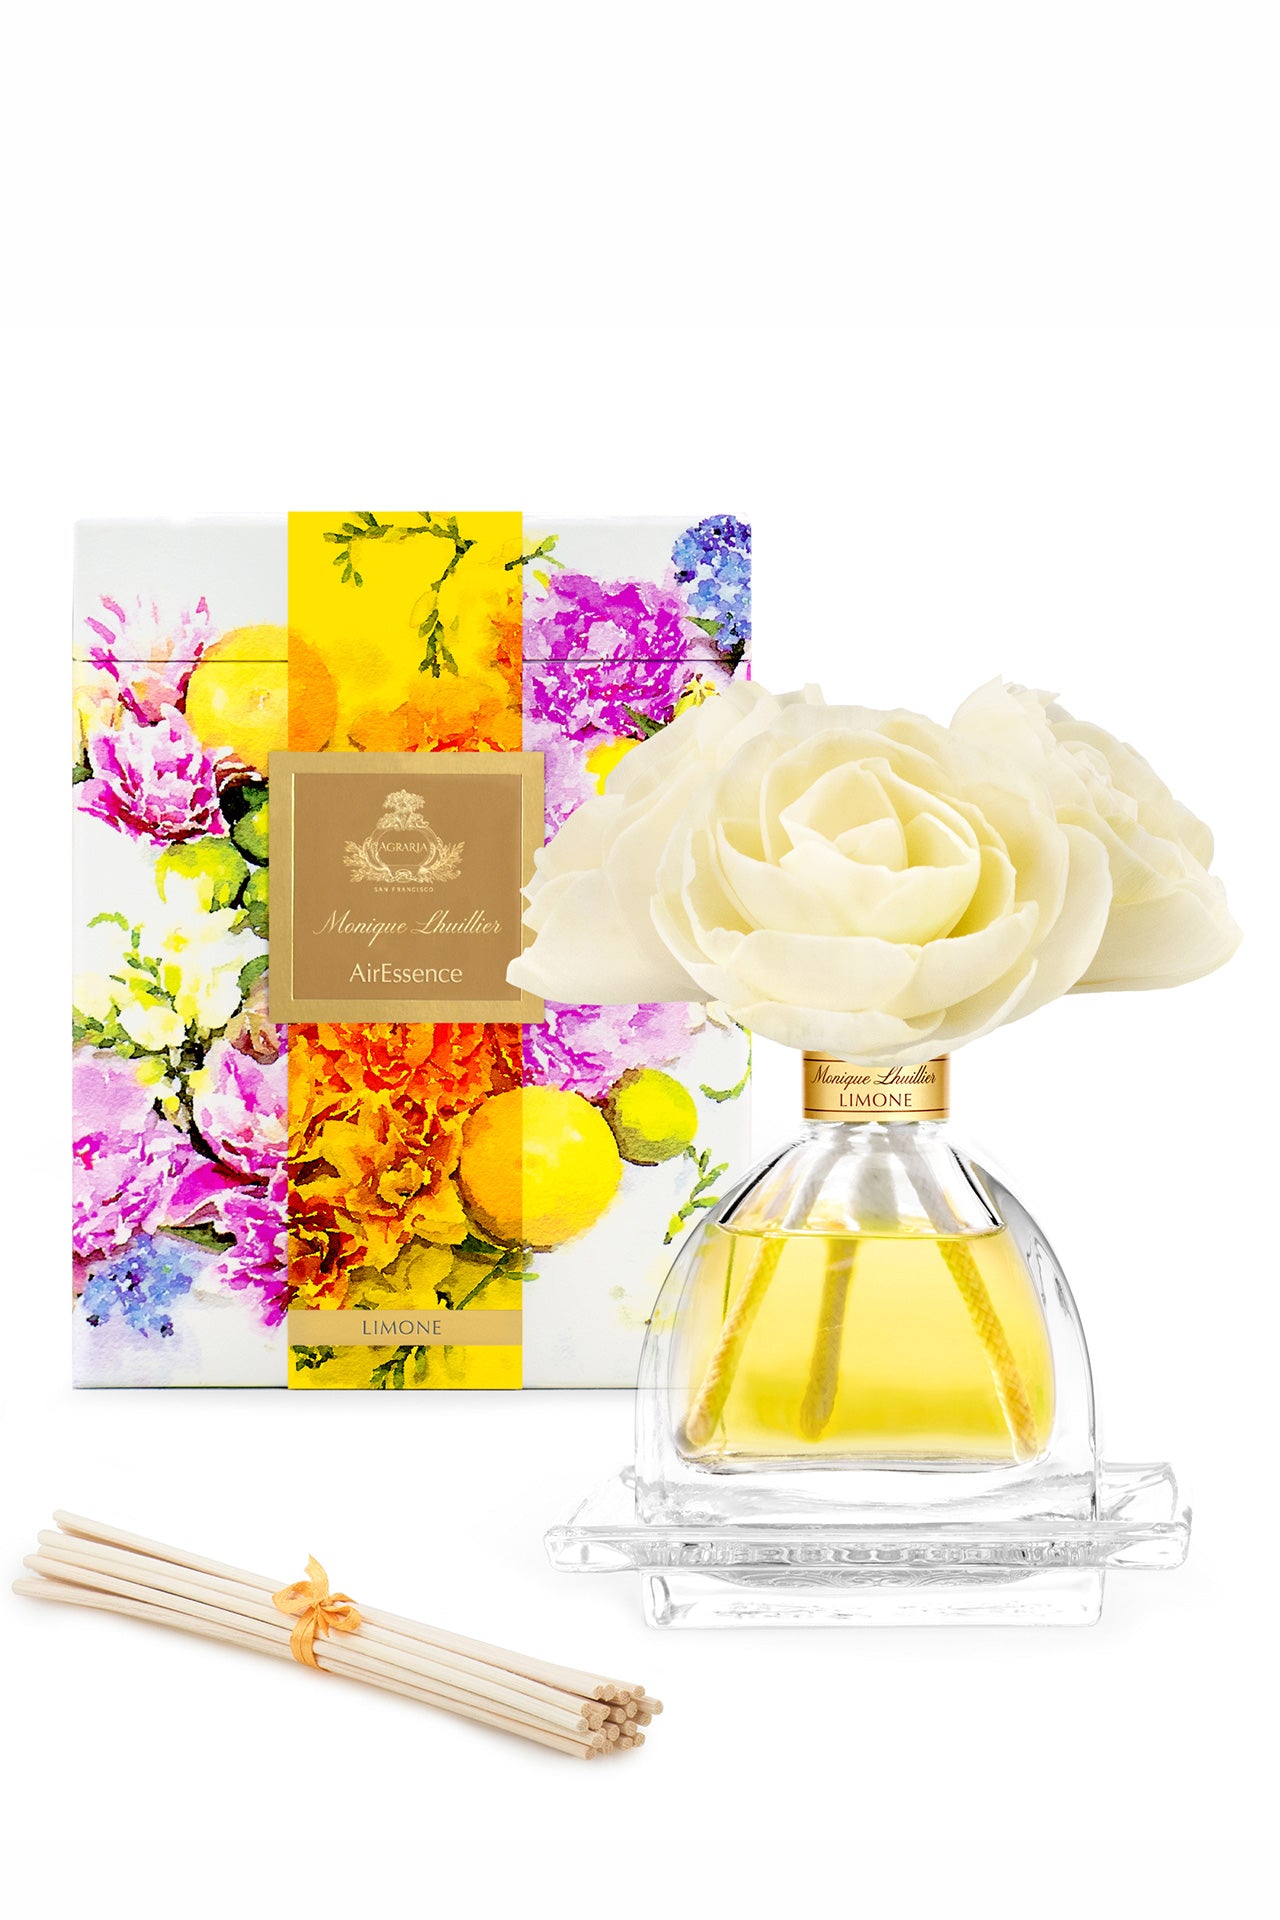 Monique Lhuillier Limone Diffuser with peony sola flowers.